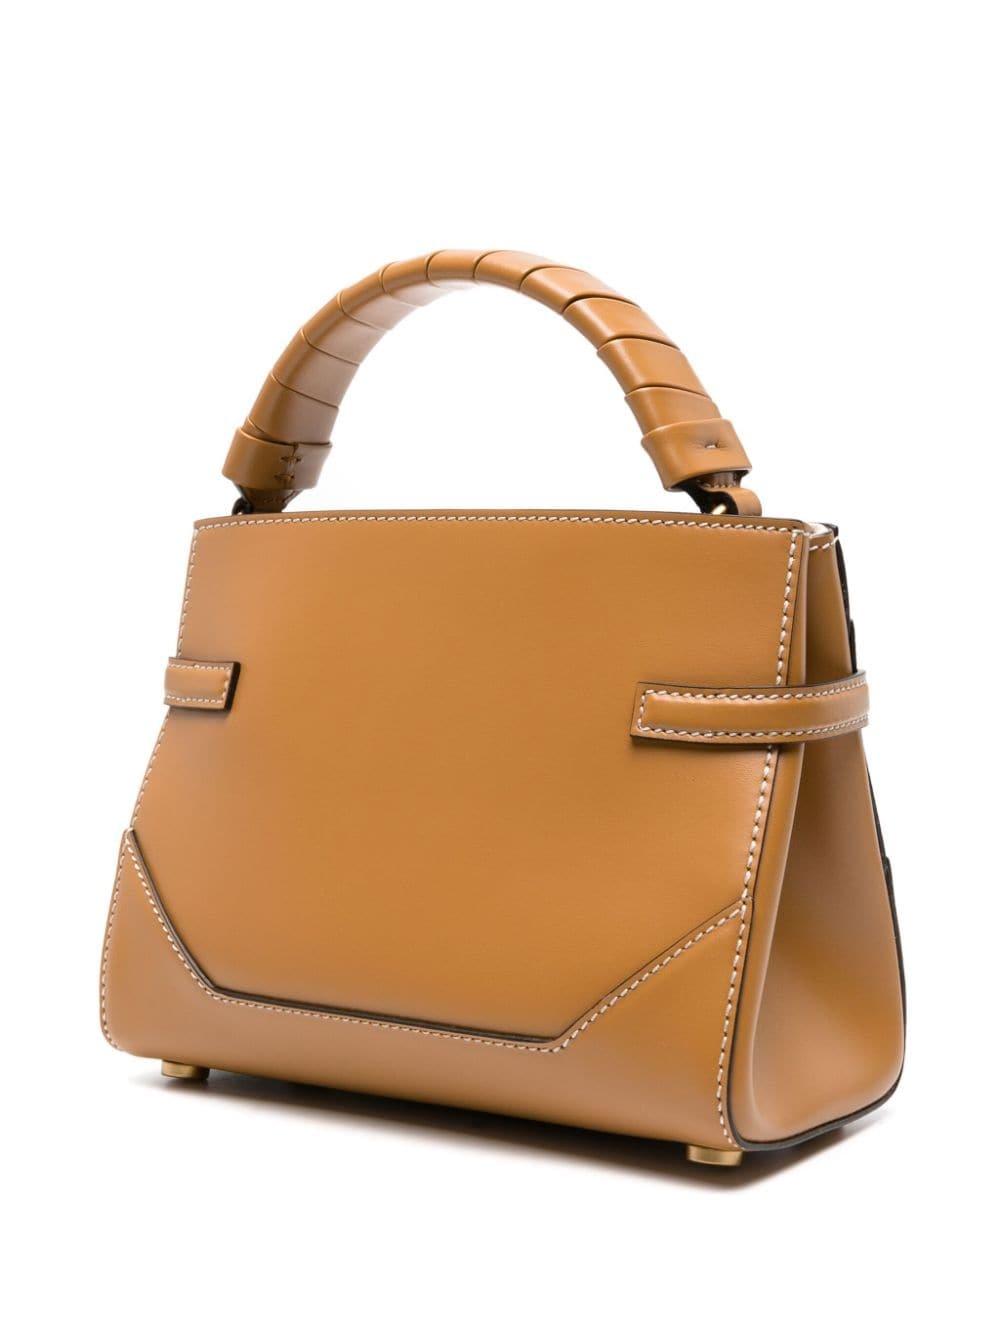 B-Buzz 22 leather tote bag - 3